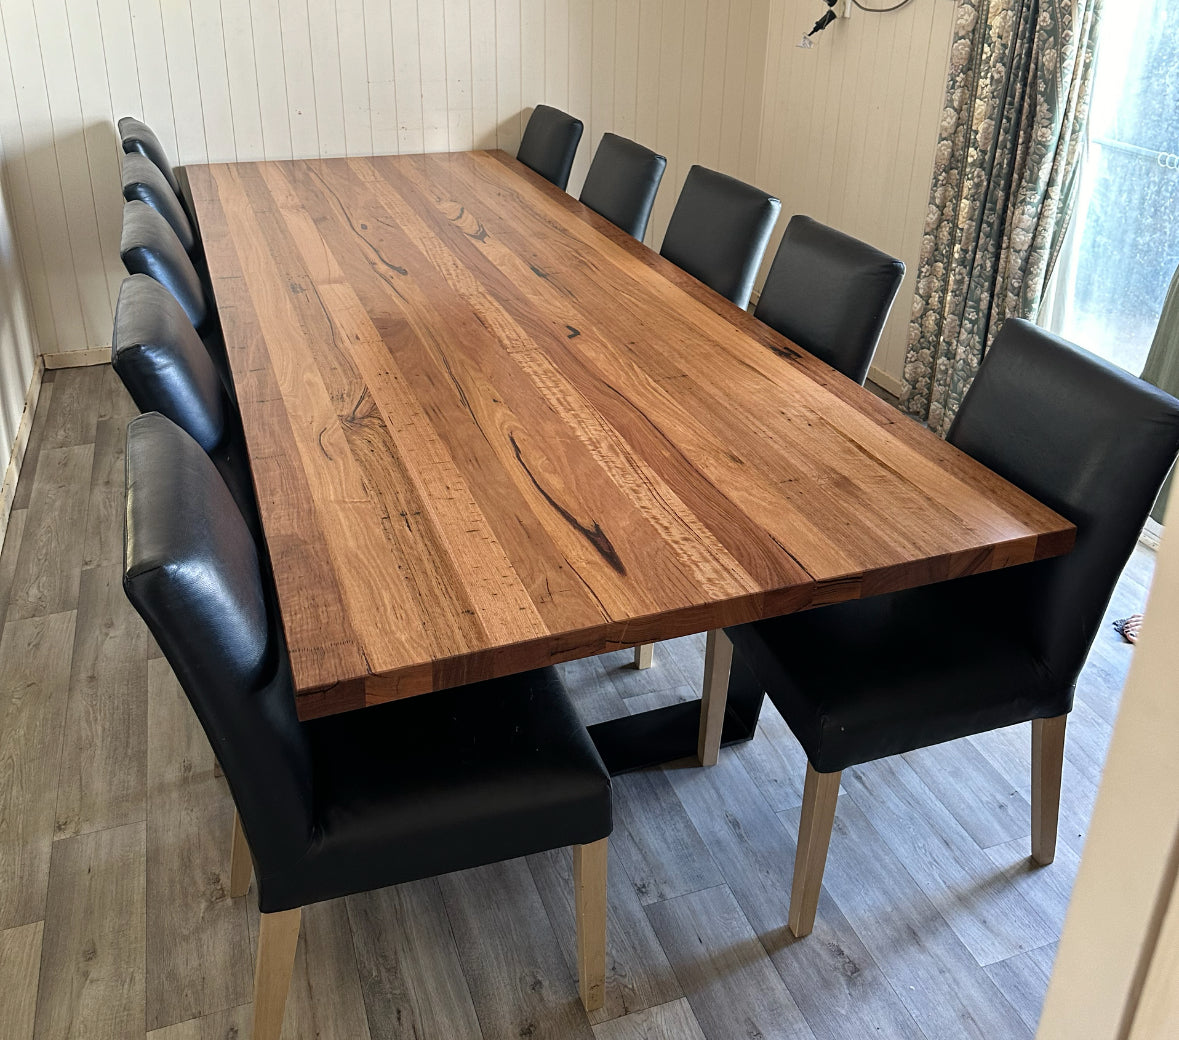 Recycled Timber Dining Table 5cm thick